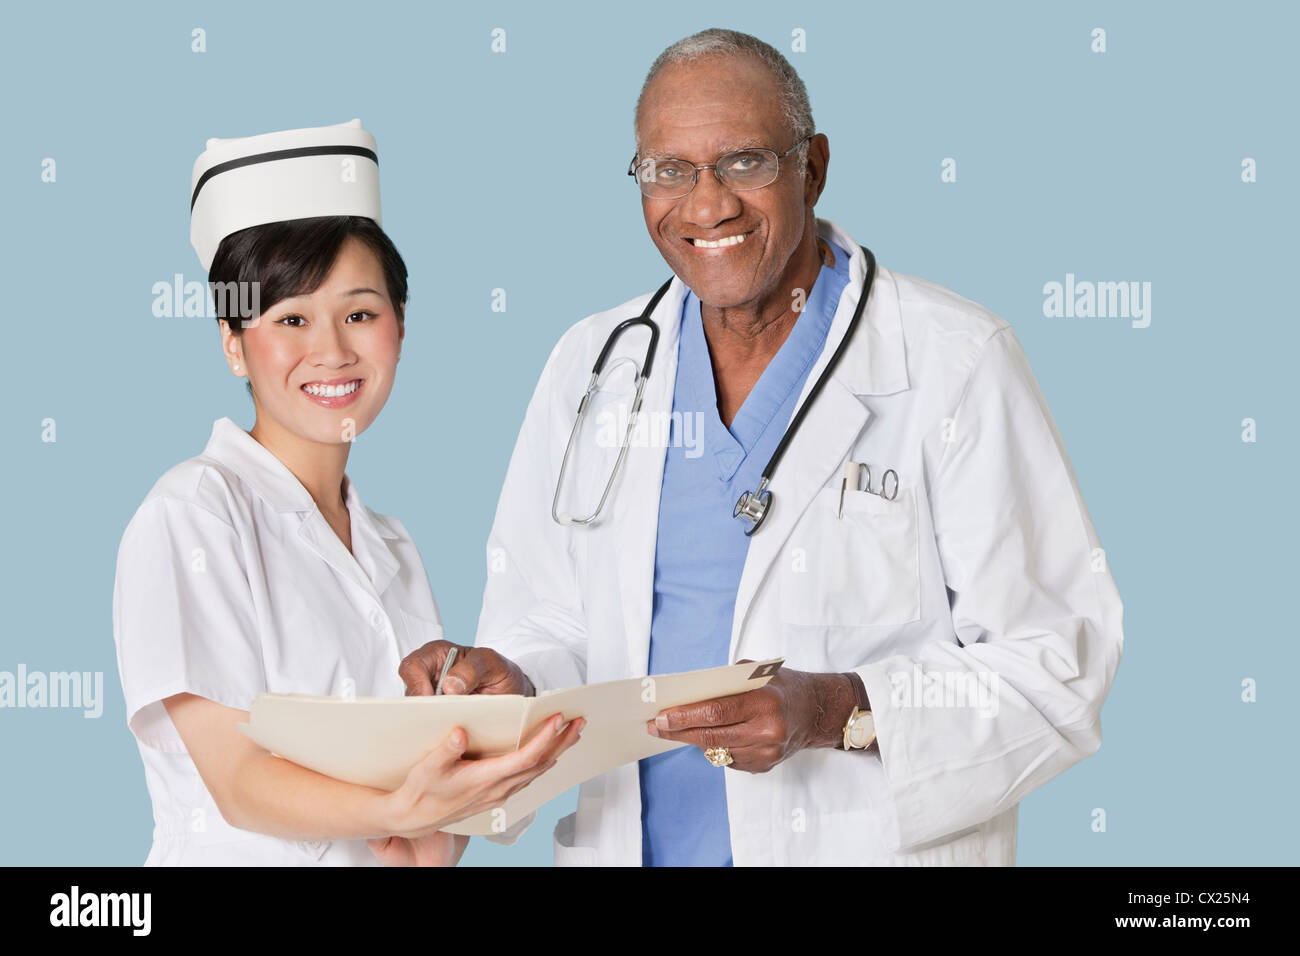 Portrait of happy health care professionals with medical report over light blue background Stock Photo